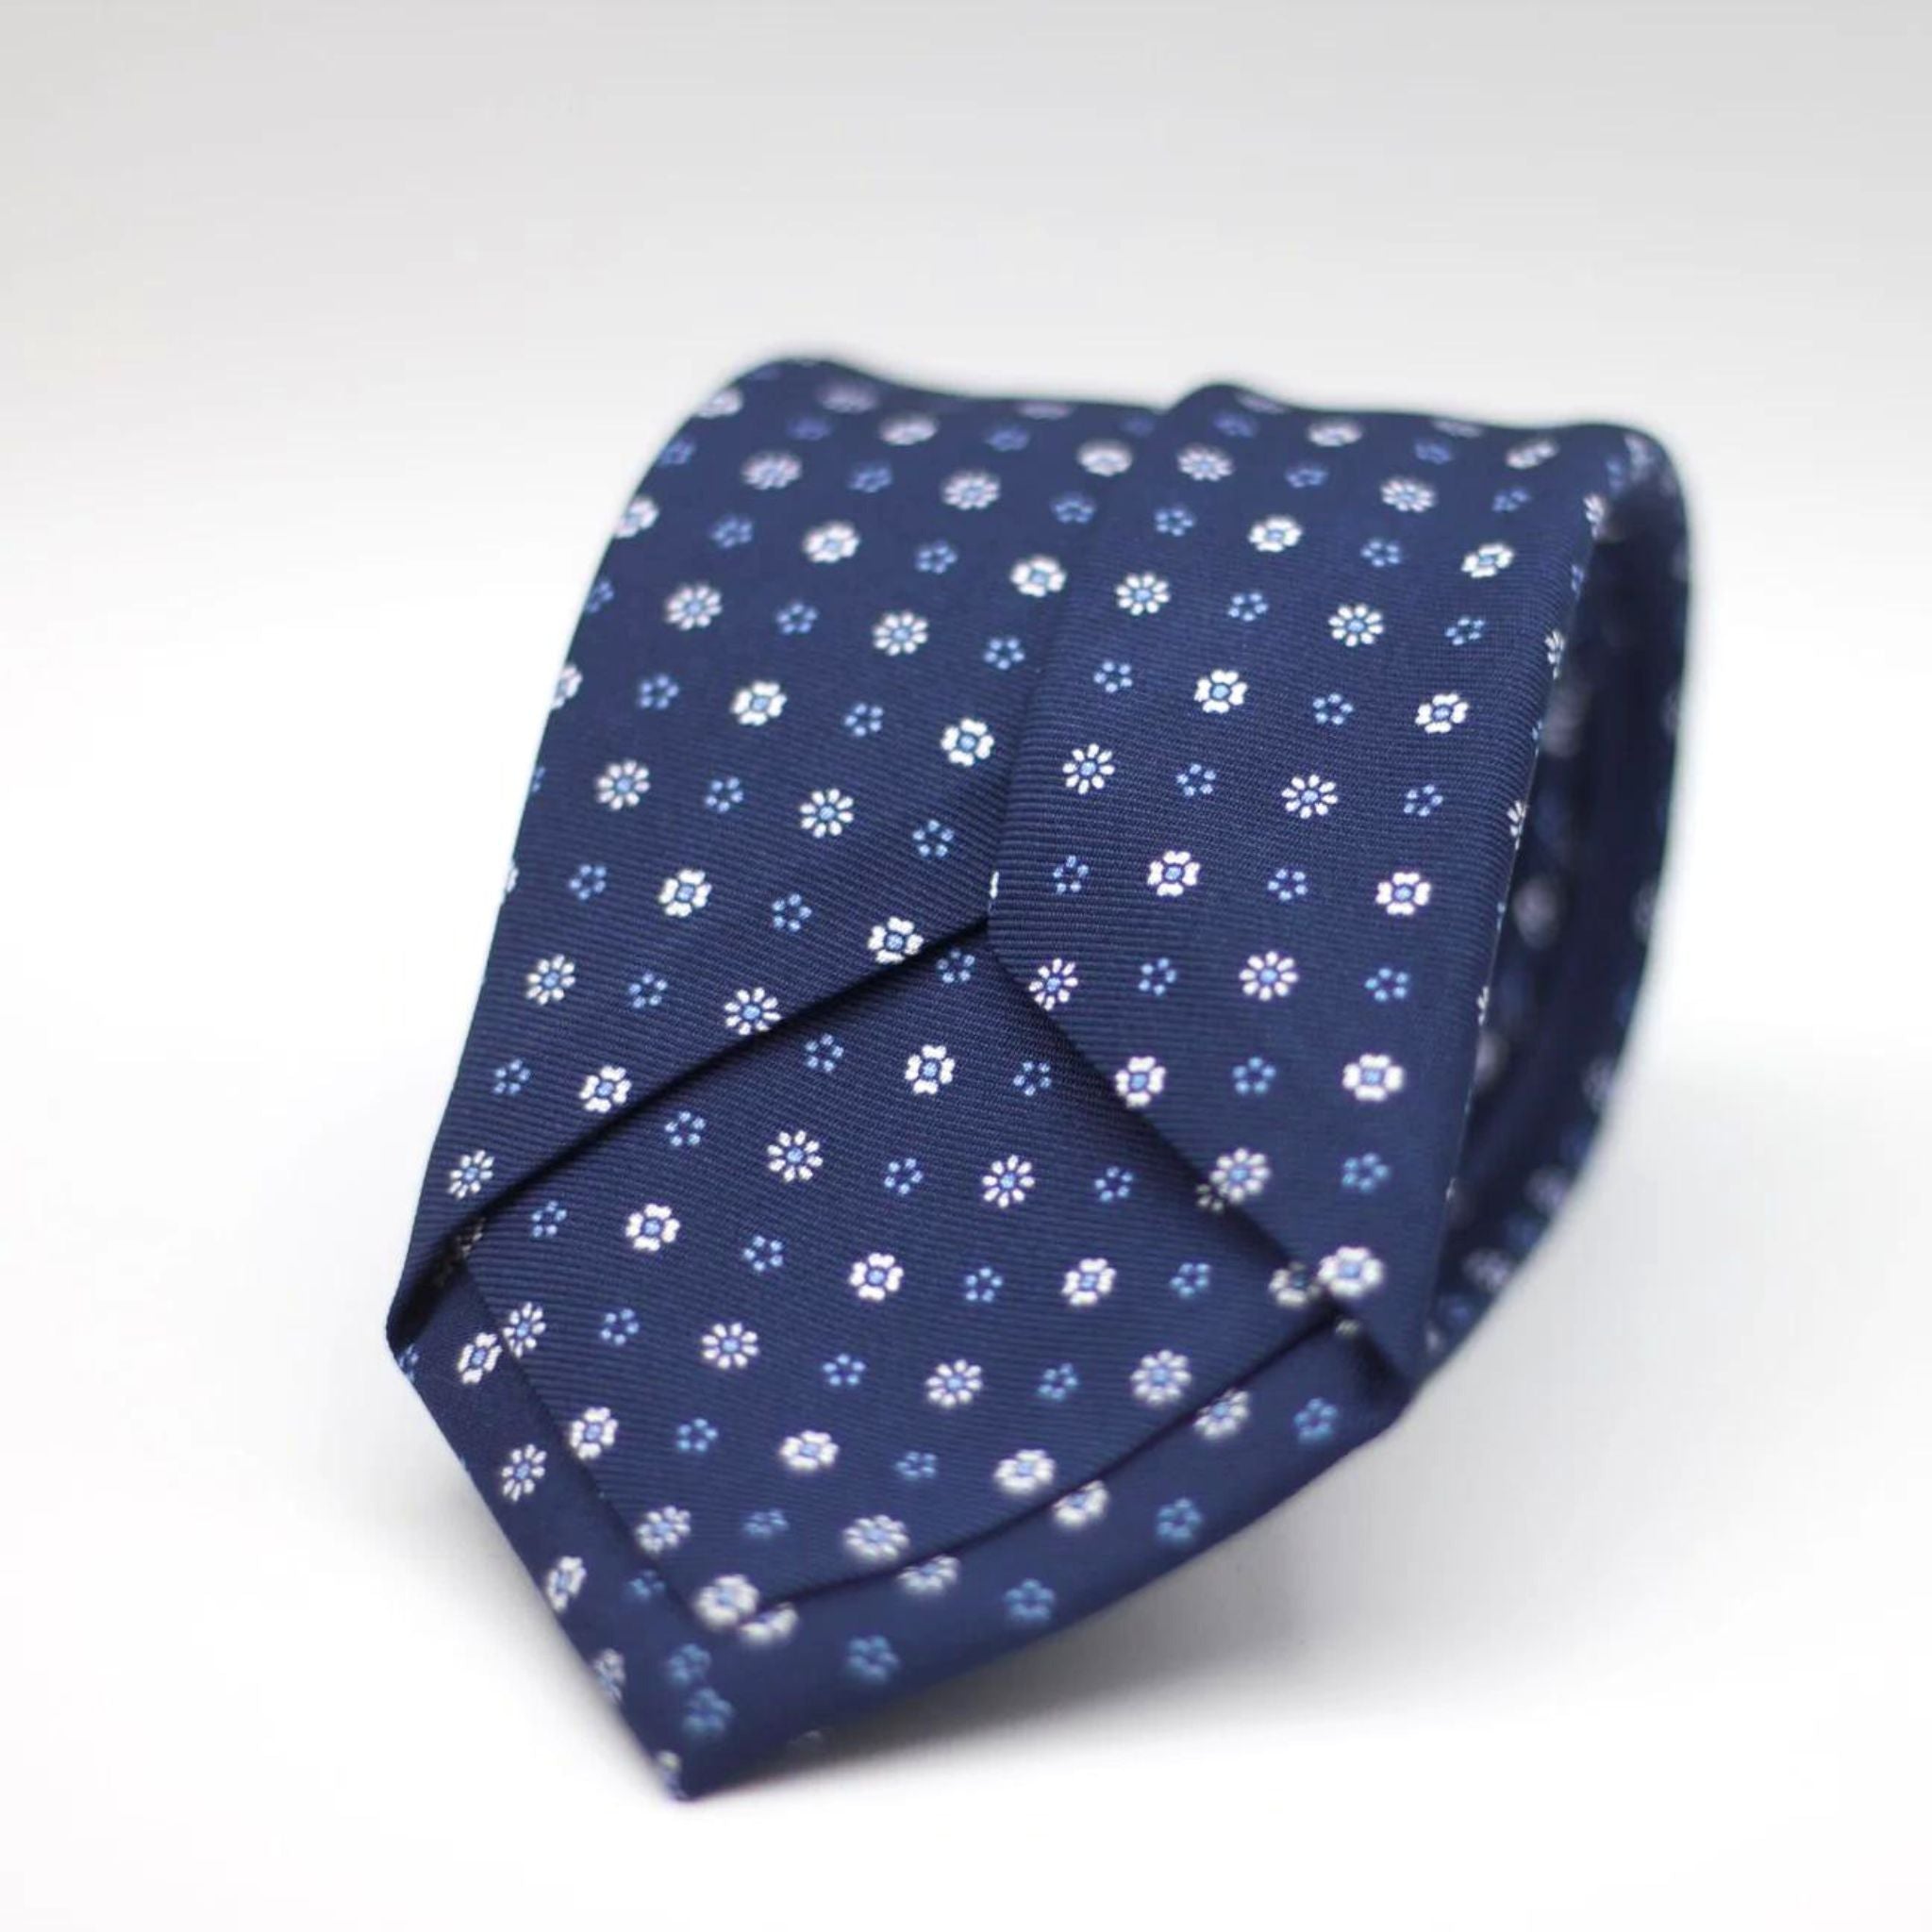 Blue with White and Light Blue floral motif tie